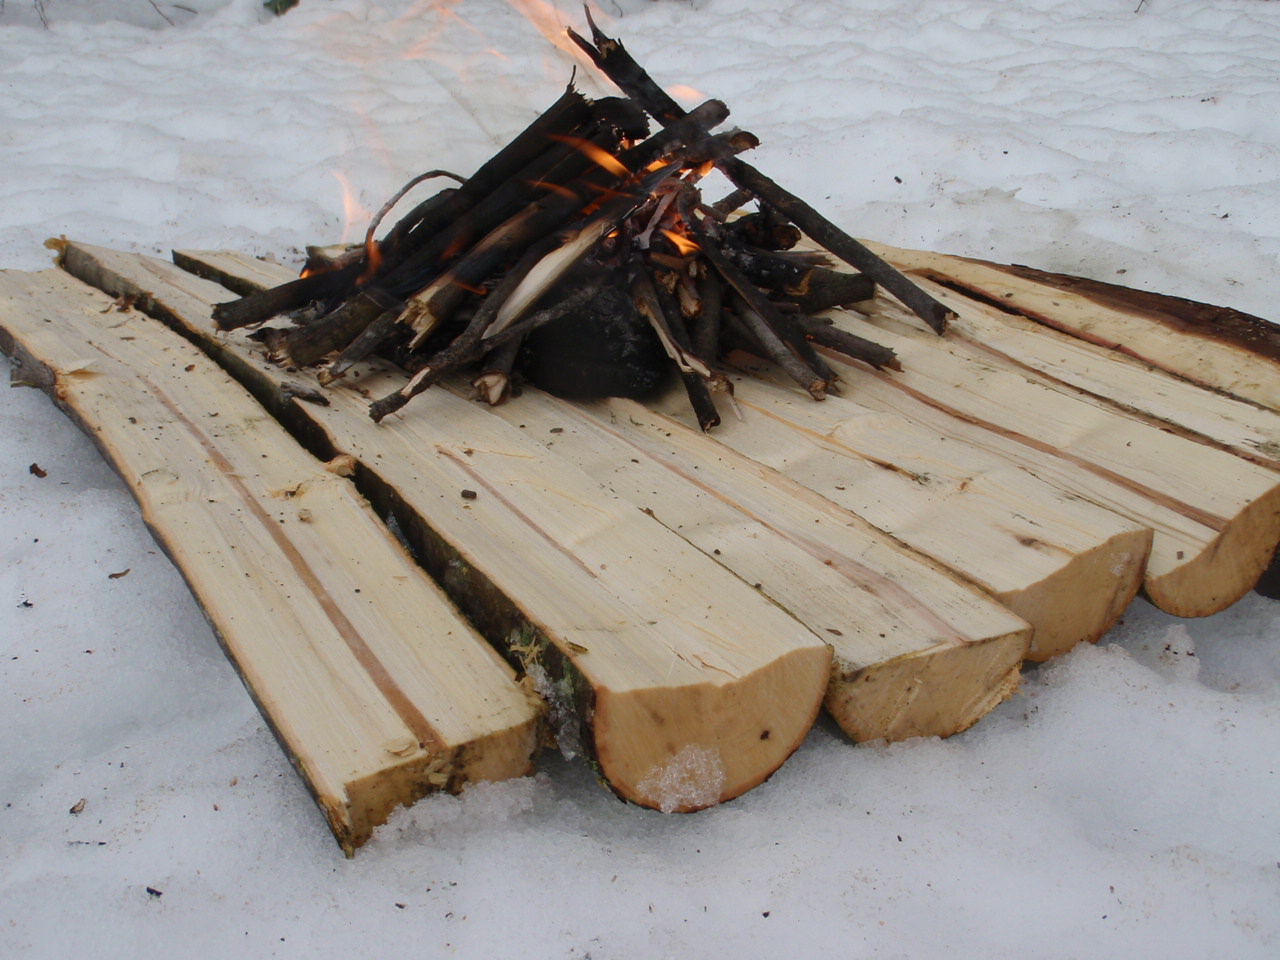 A fire built on planks of wood to keep dry from the snow.